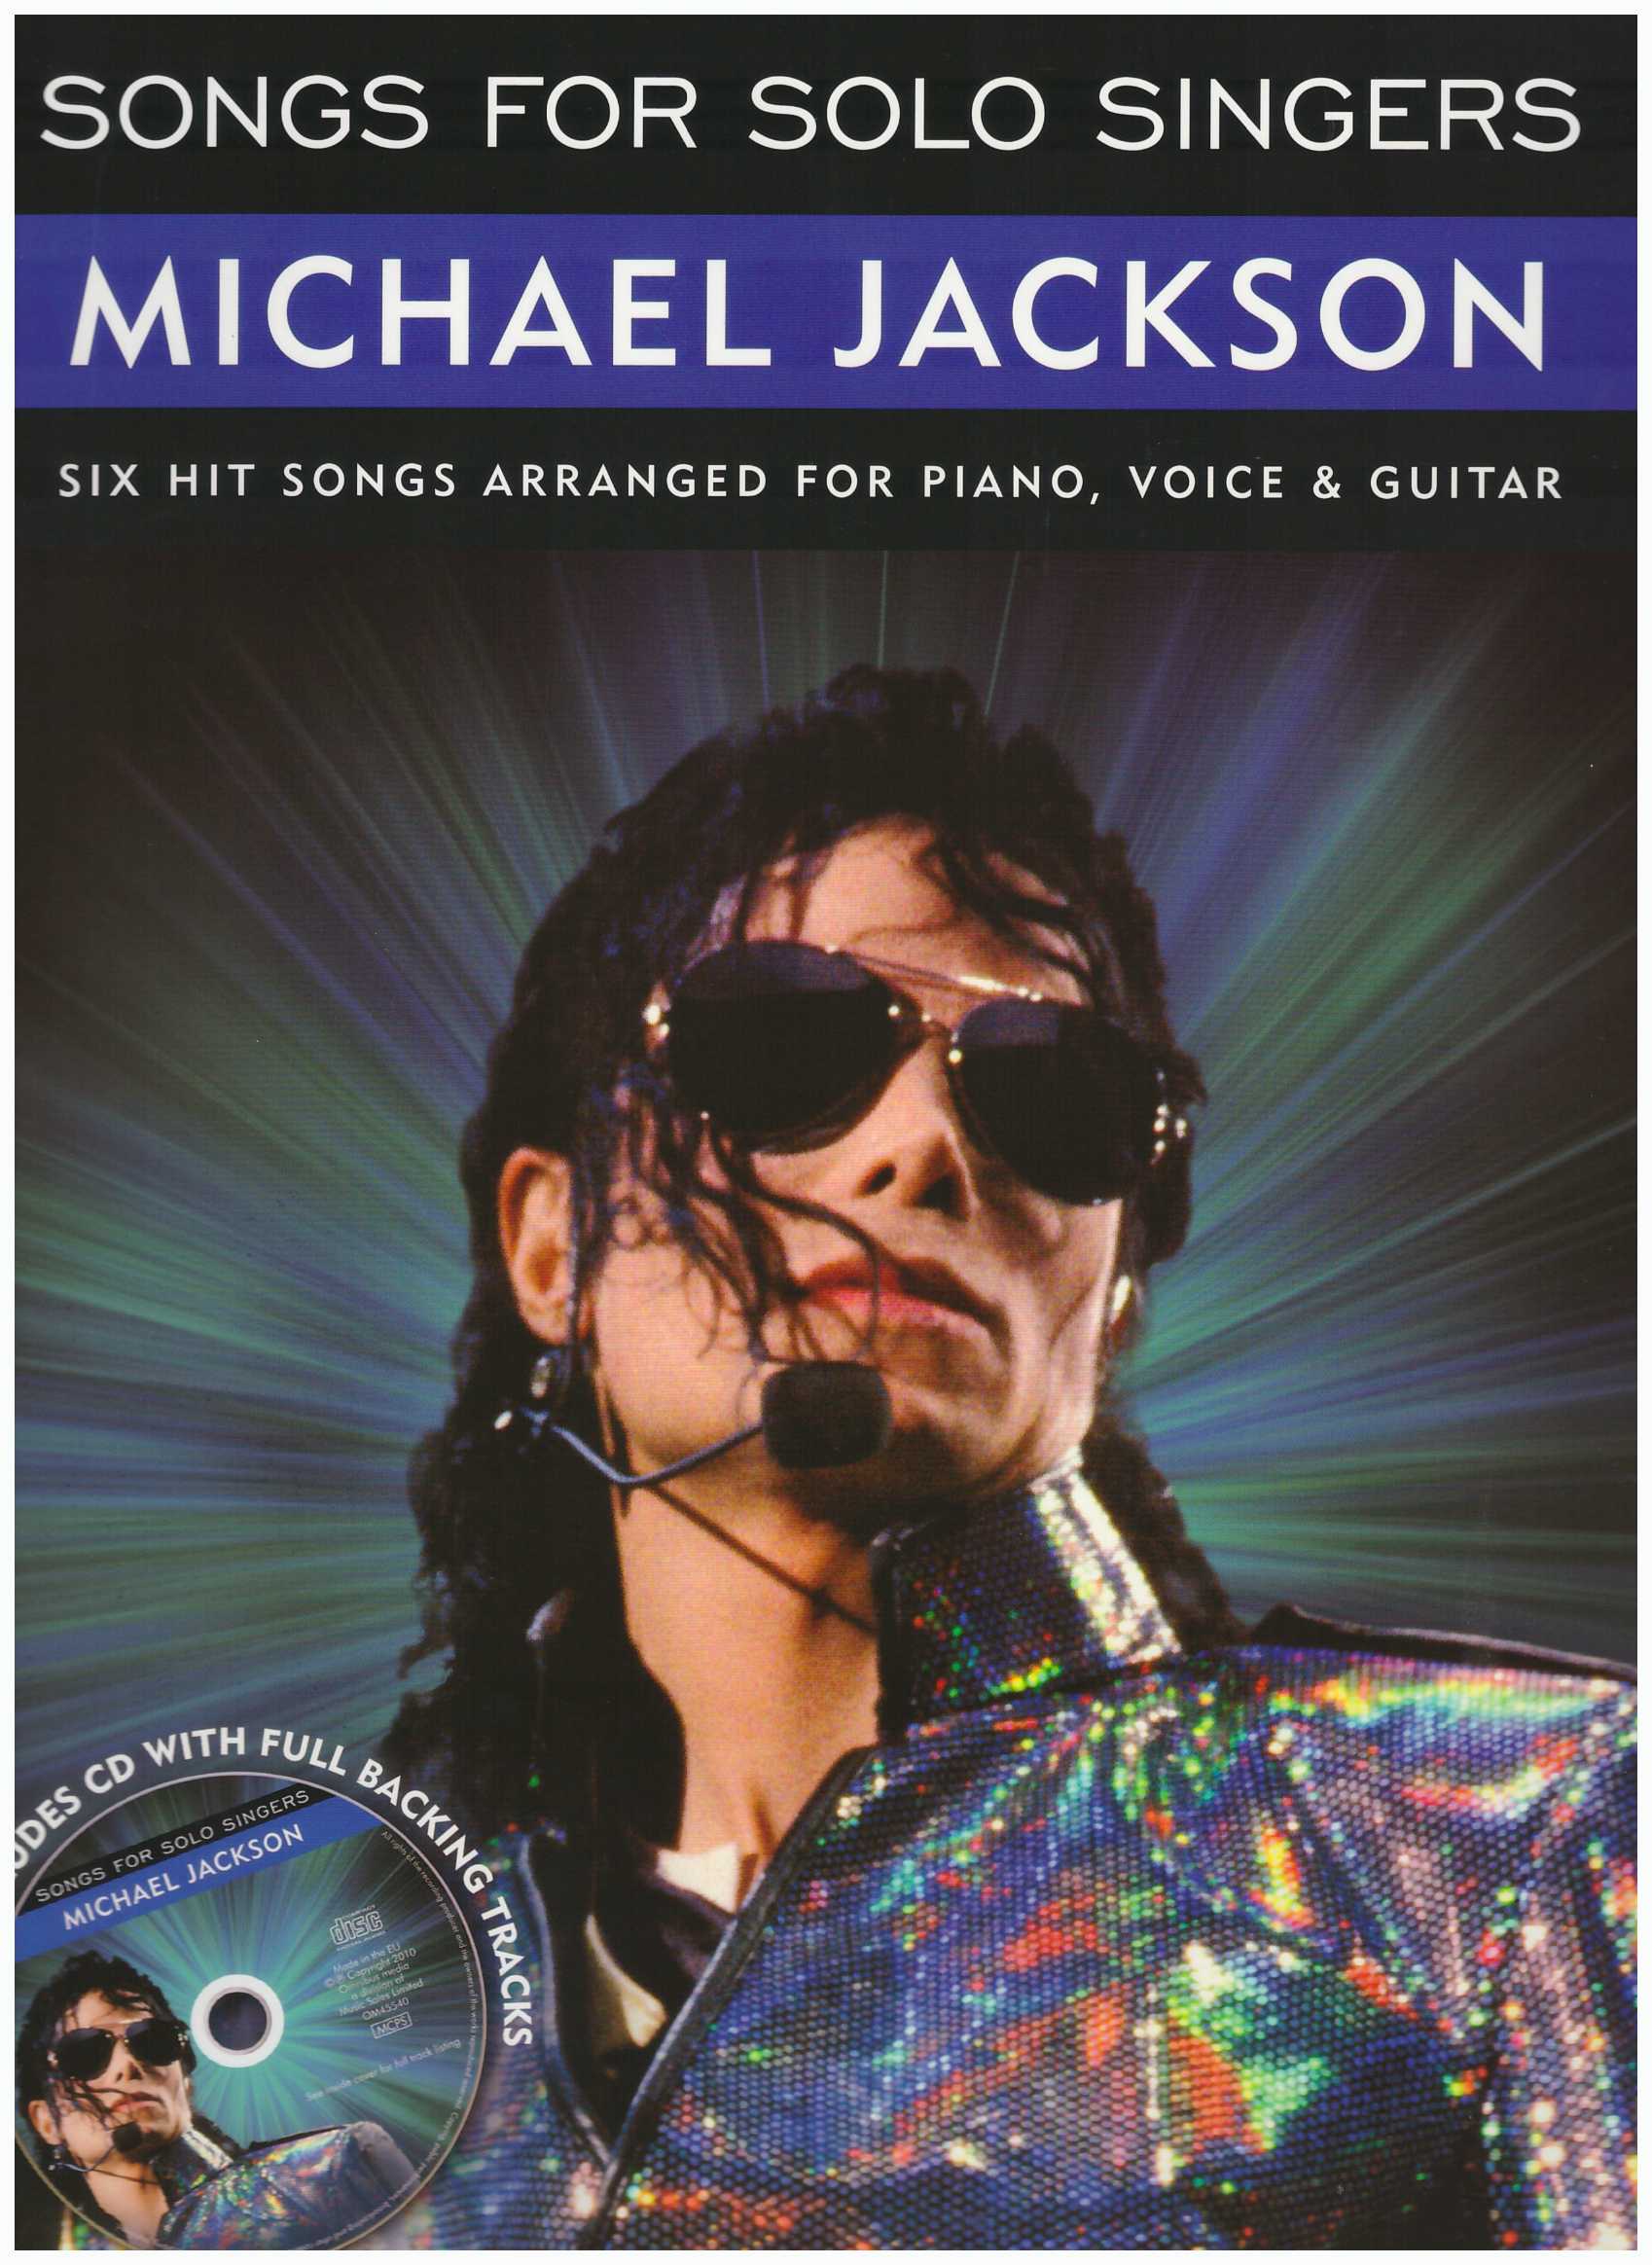 Songs For Solo Singers Michael Jackson  / PVG Book / Piano Book / Pop Song Book / Vocal Book / Guitar Book